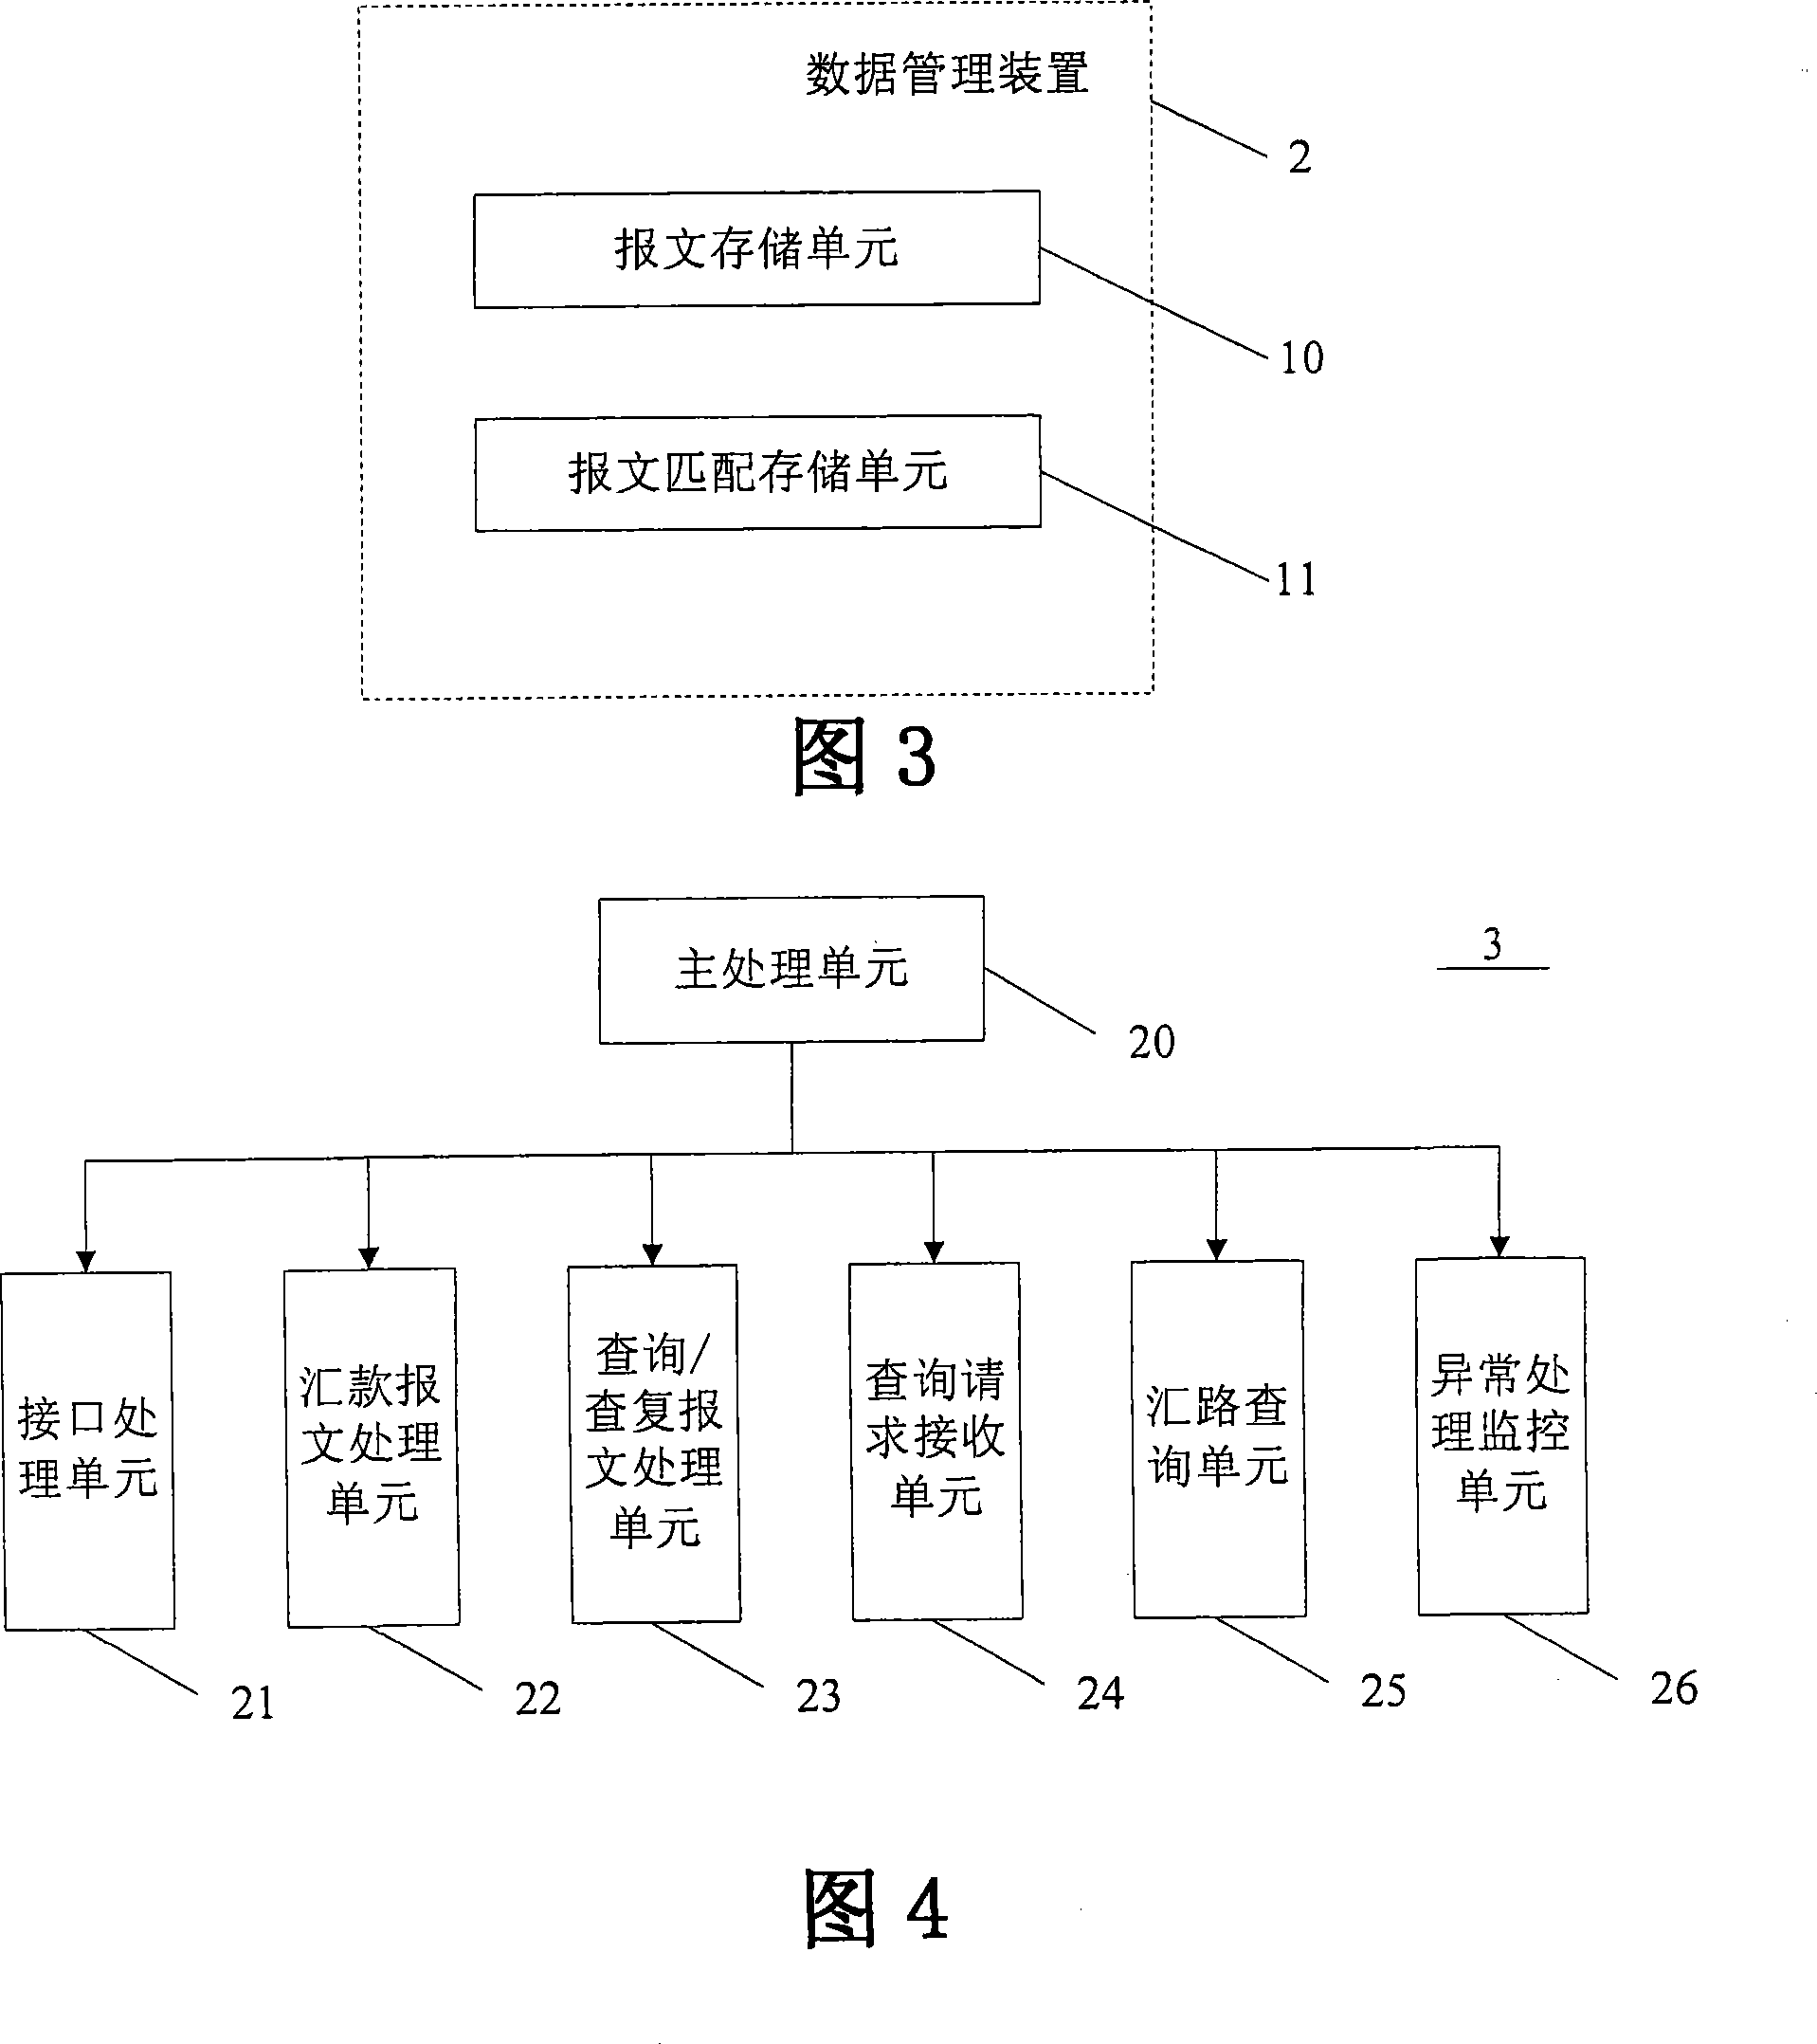 Remittance path following system and method